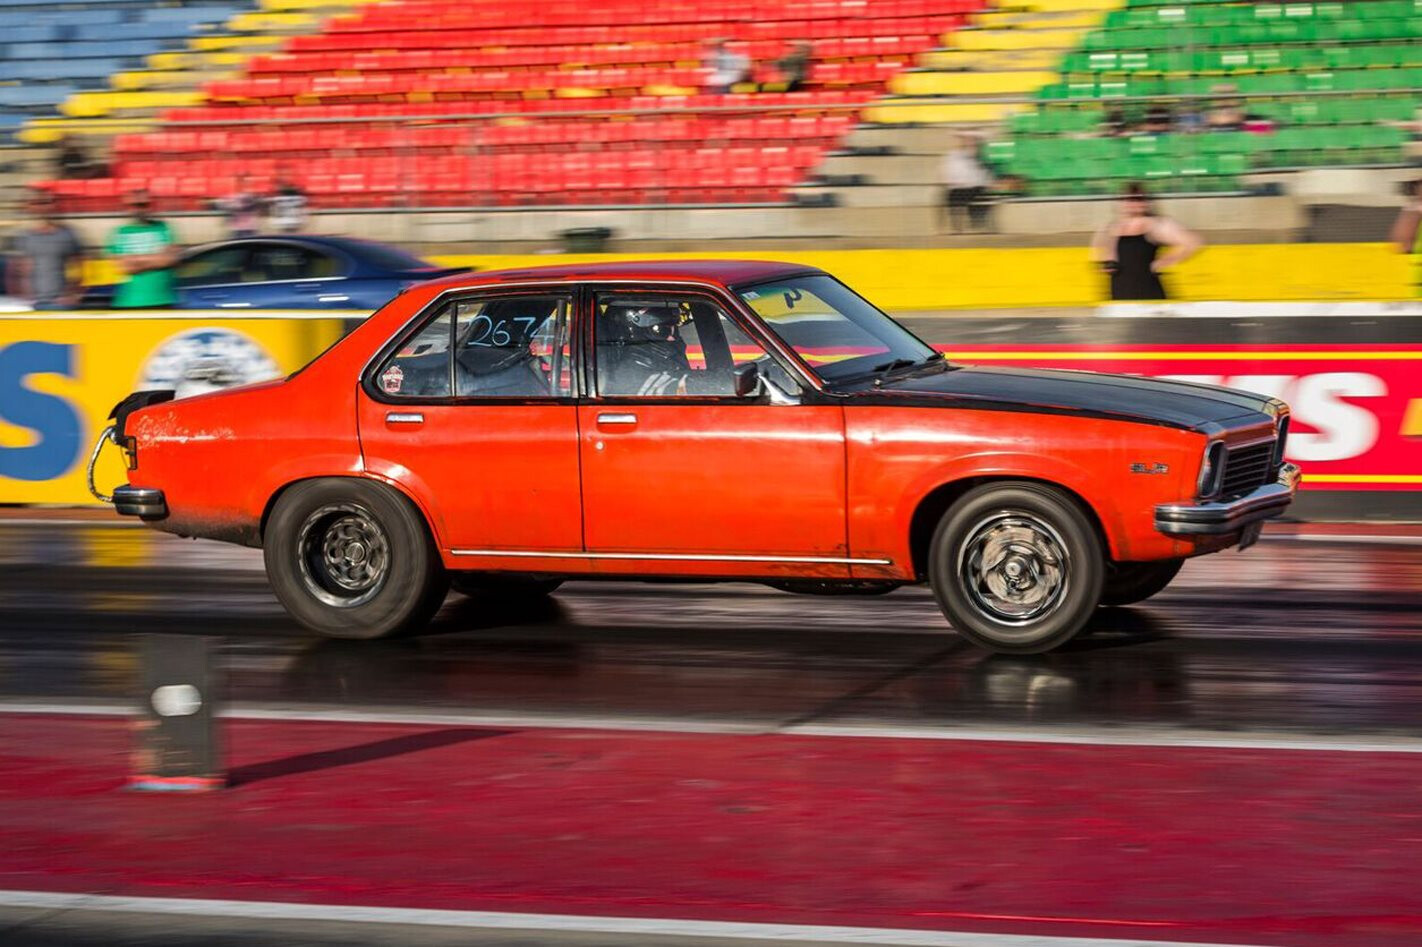 CRUSTY TORANA HITS THE WALL AT 170MPH TWO WEEKS FROM DRAG CHALLENGE – VIDEO